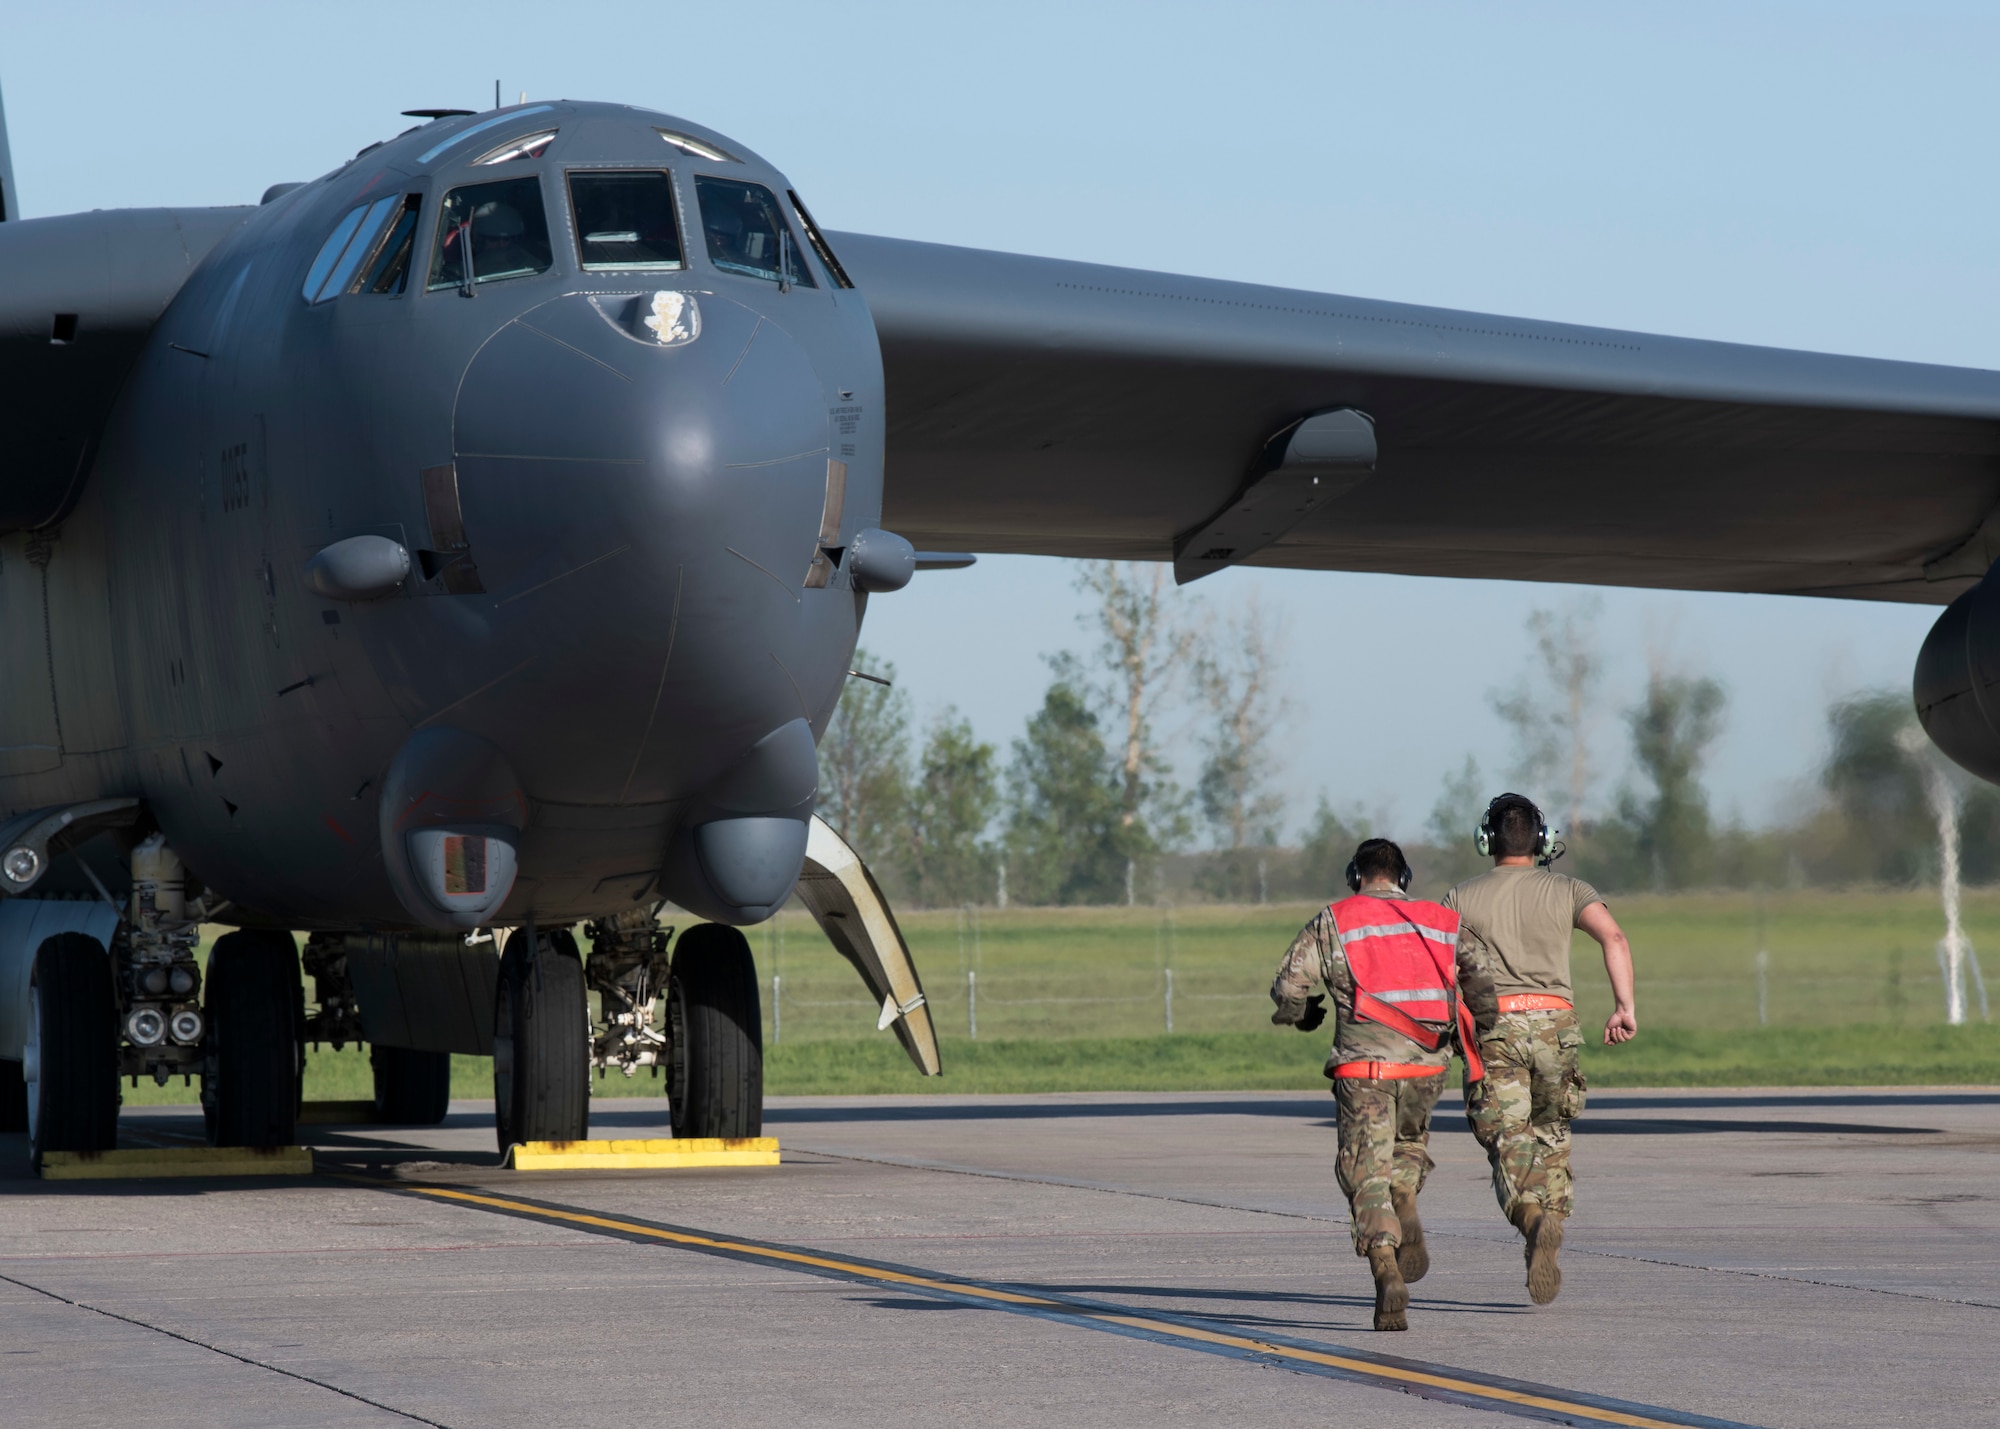 From left, Airmen 1st Classes Rubio Steven and Ian Arriaza, 5th Aircraft Maintenance Squadron crew chiefs, prepare a B-52H Stratofortress for takeoff at Minot Air Force Base, North Dakota, June 2, 2020. The B-52s are conducting a long-range, long duration strategic Bomber Task Force mission throughout Europe and the Arctic region. (U.S. Air Force photo by Senior Airman Alyssa Day)